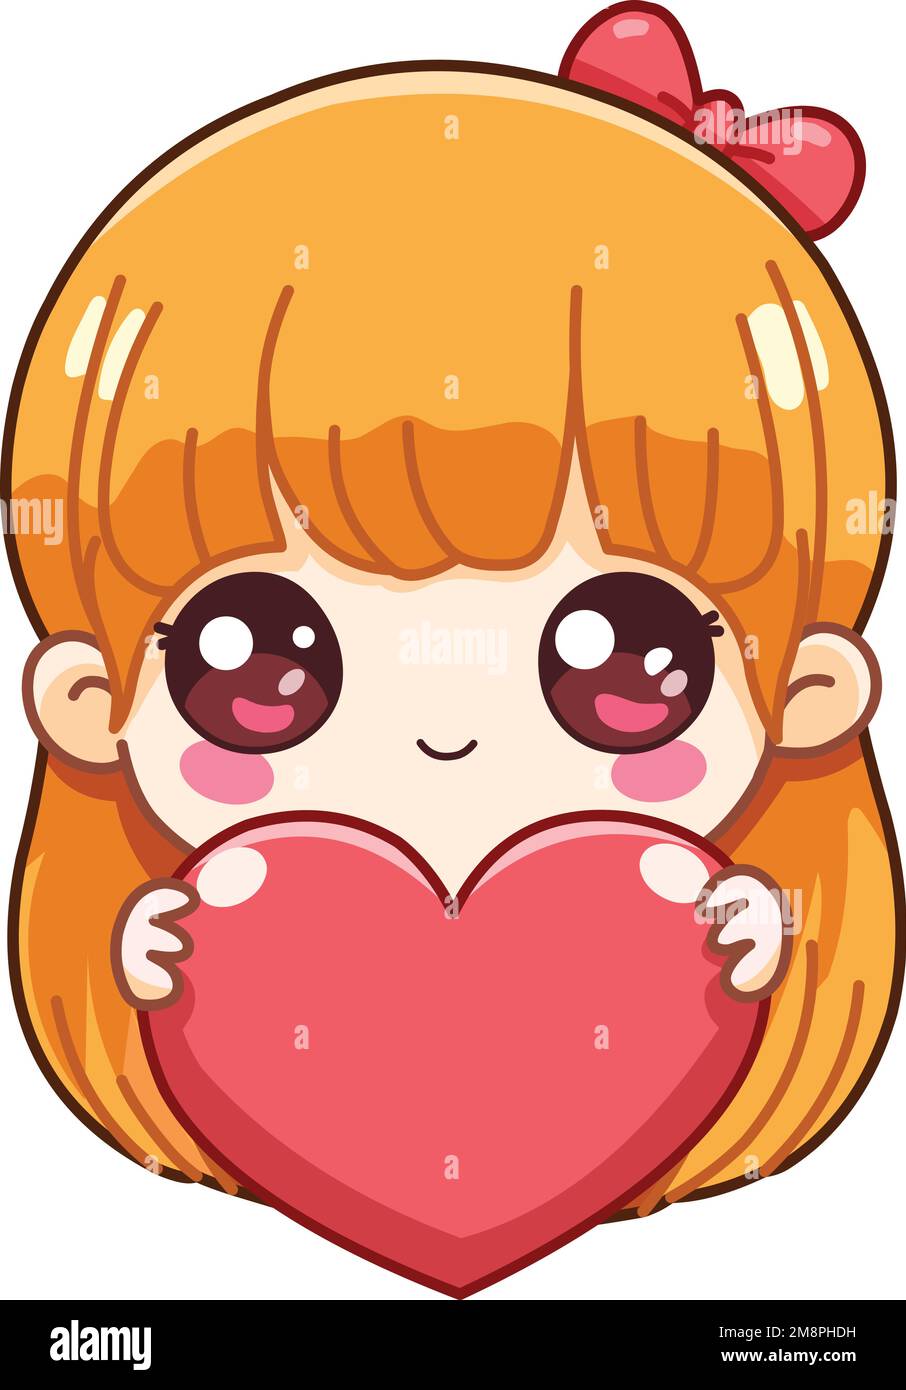 Cute little girl holding a big heart in a chibi style Stock Vector